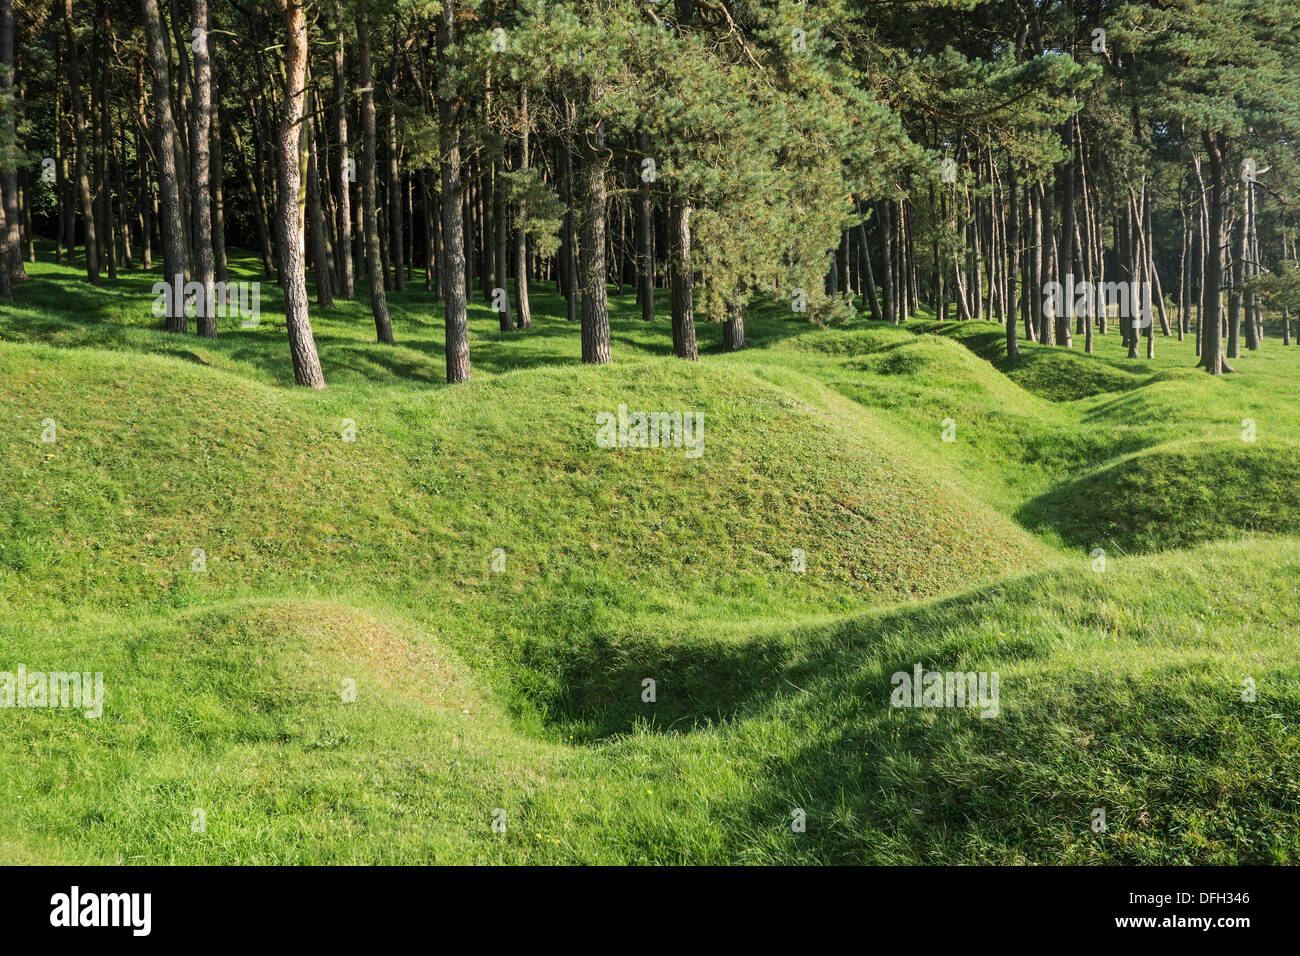 Preserved First World War One Canadian WWI shelled battlefield showing bomb craters at Vimy Ridge, Givenchy-en-Gohelle, France Stock Photo